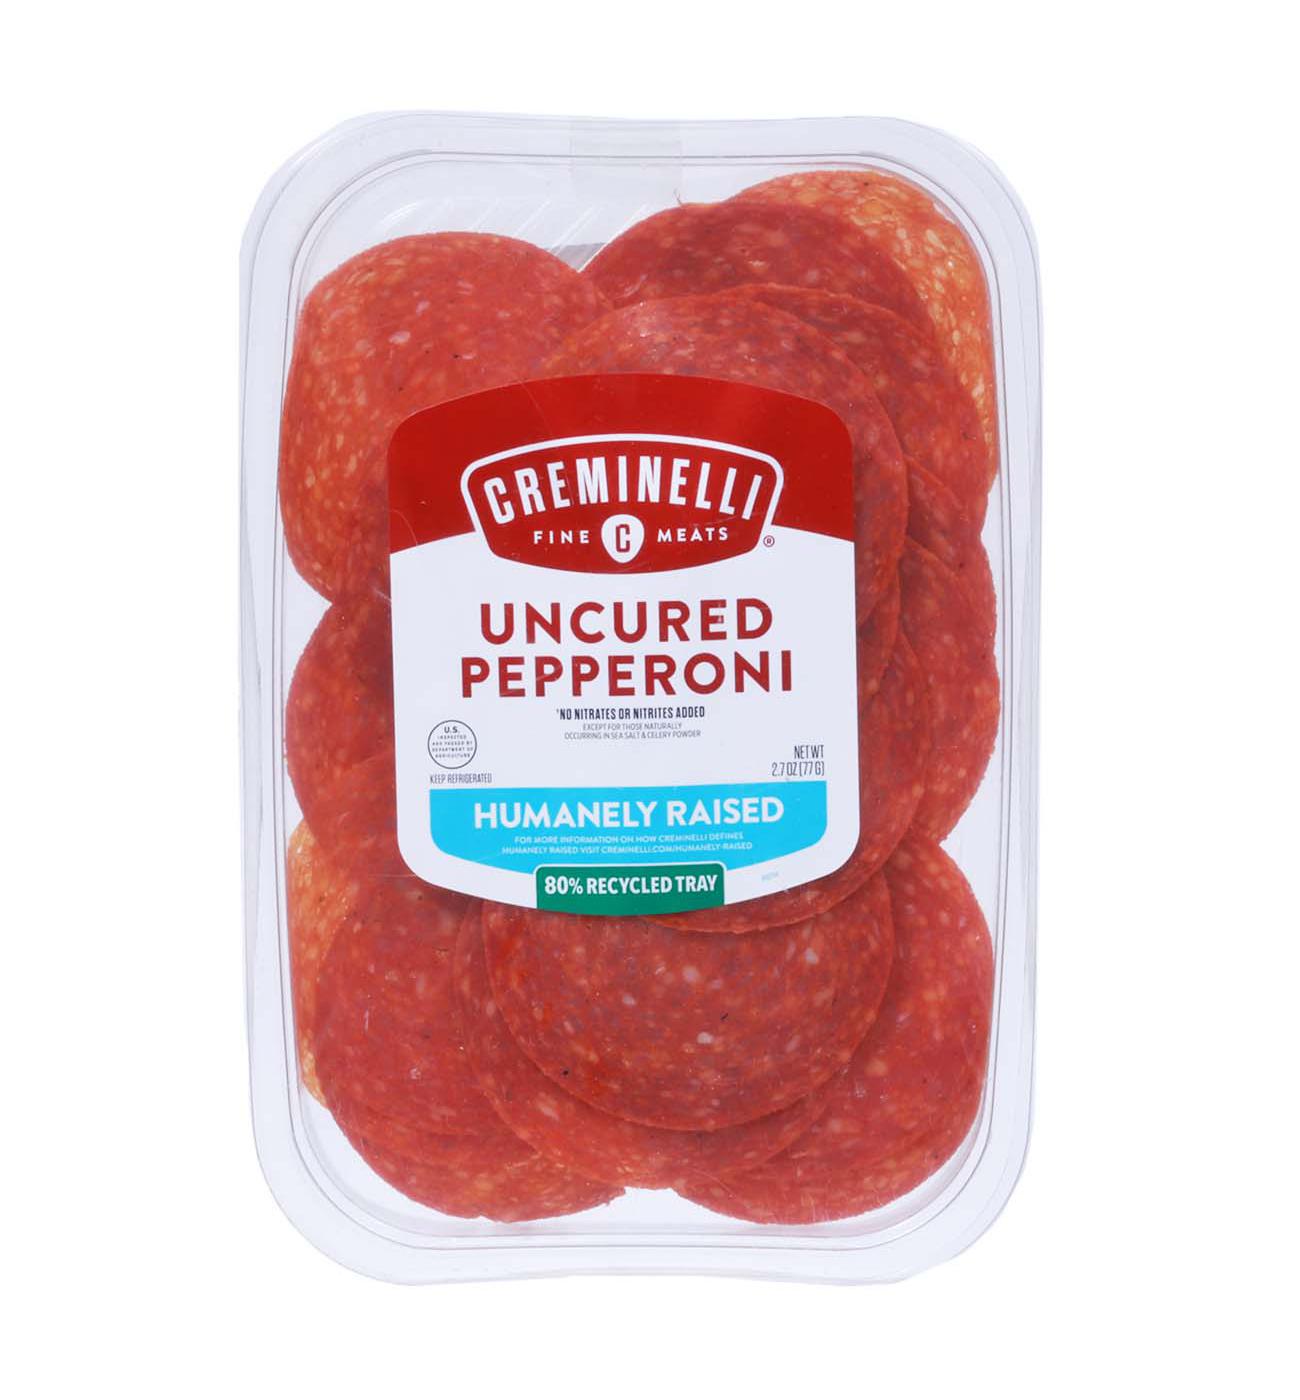 Creminelli Fine Meats Uncured Pepperoni Slices; image 1 of 2